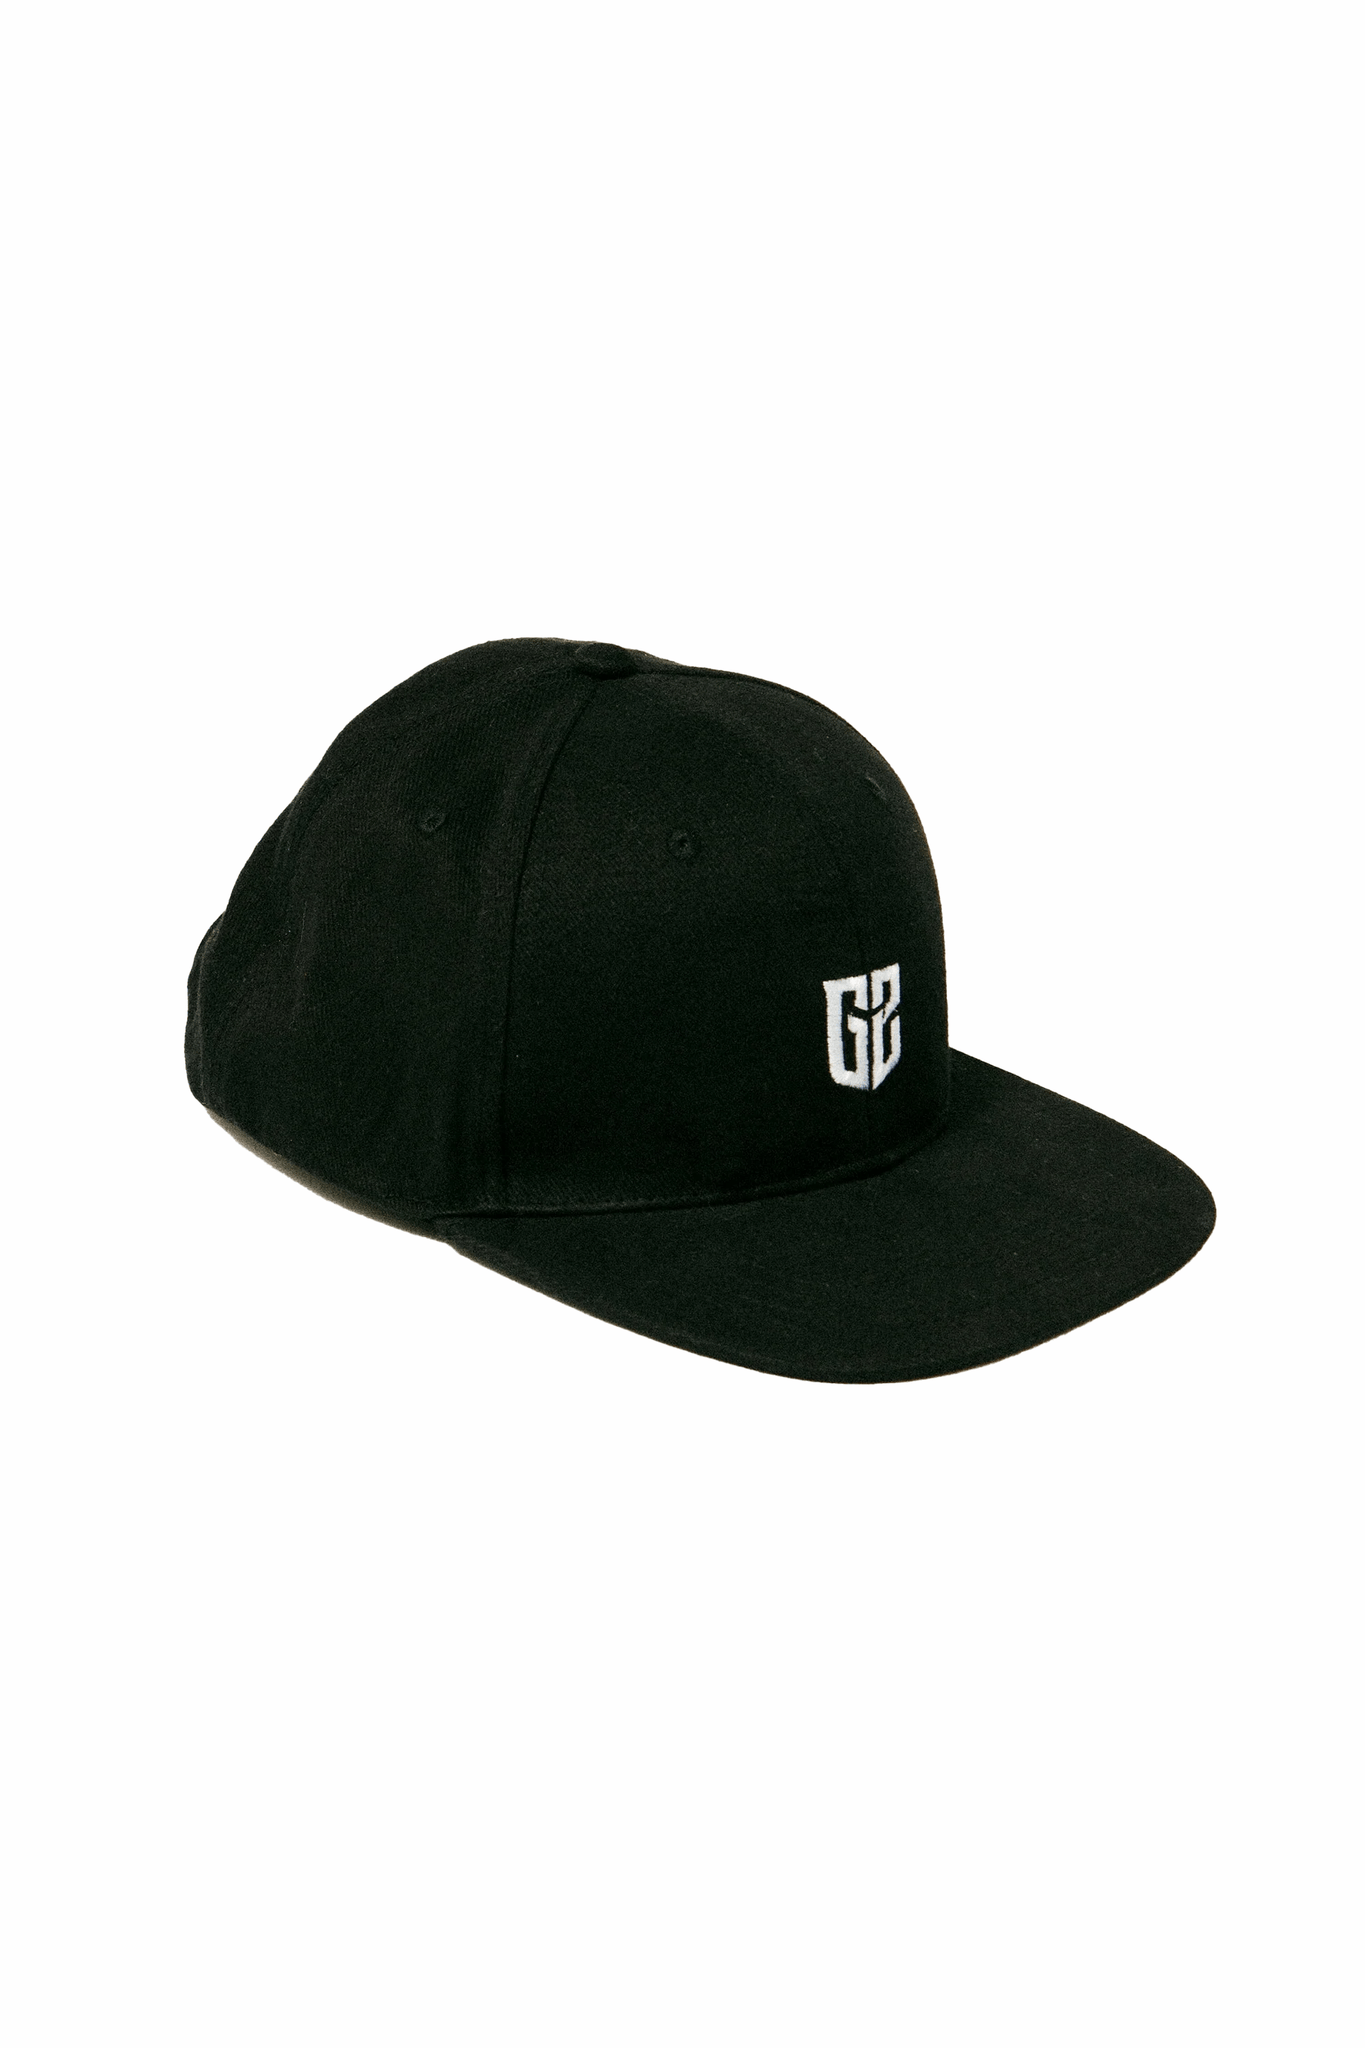 Black G2 Esports essentials snapback cap with flat brim. Level up your style with this sleek and adjustable esports team cap